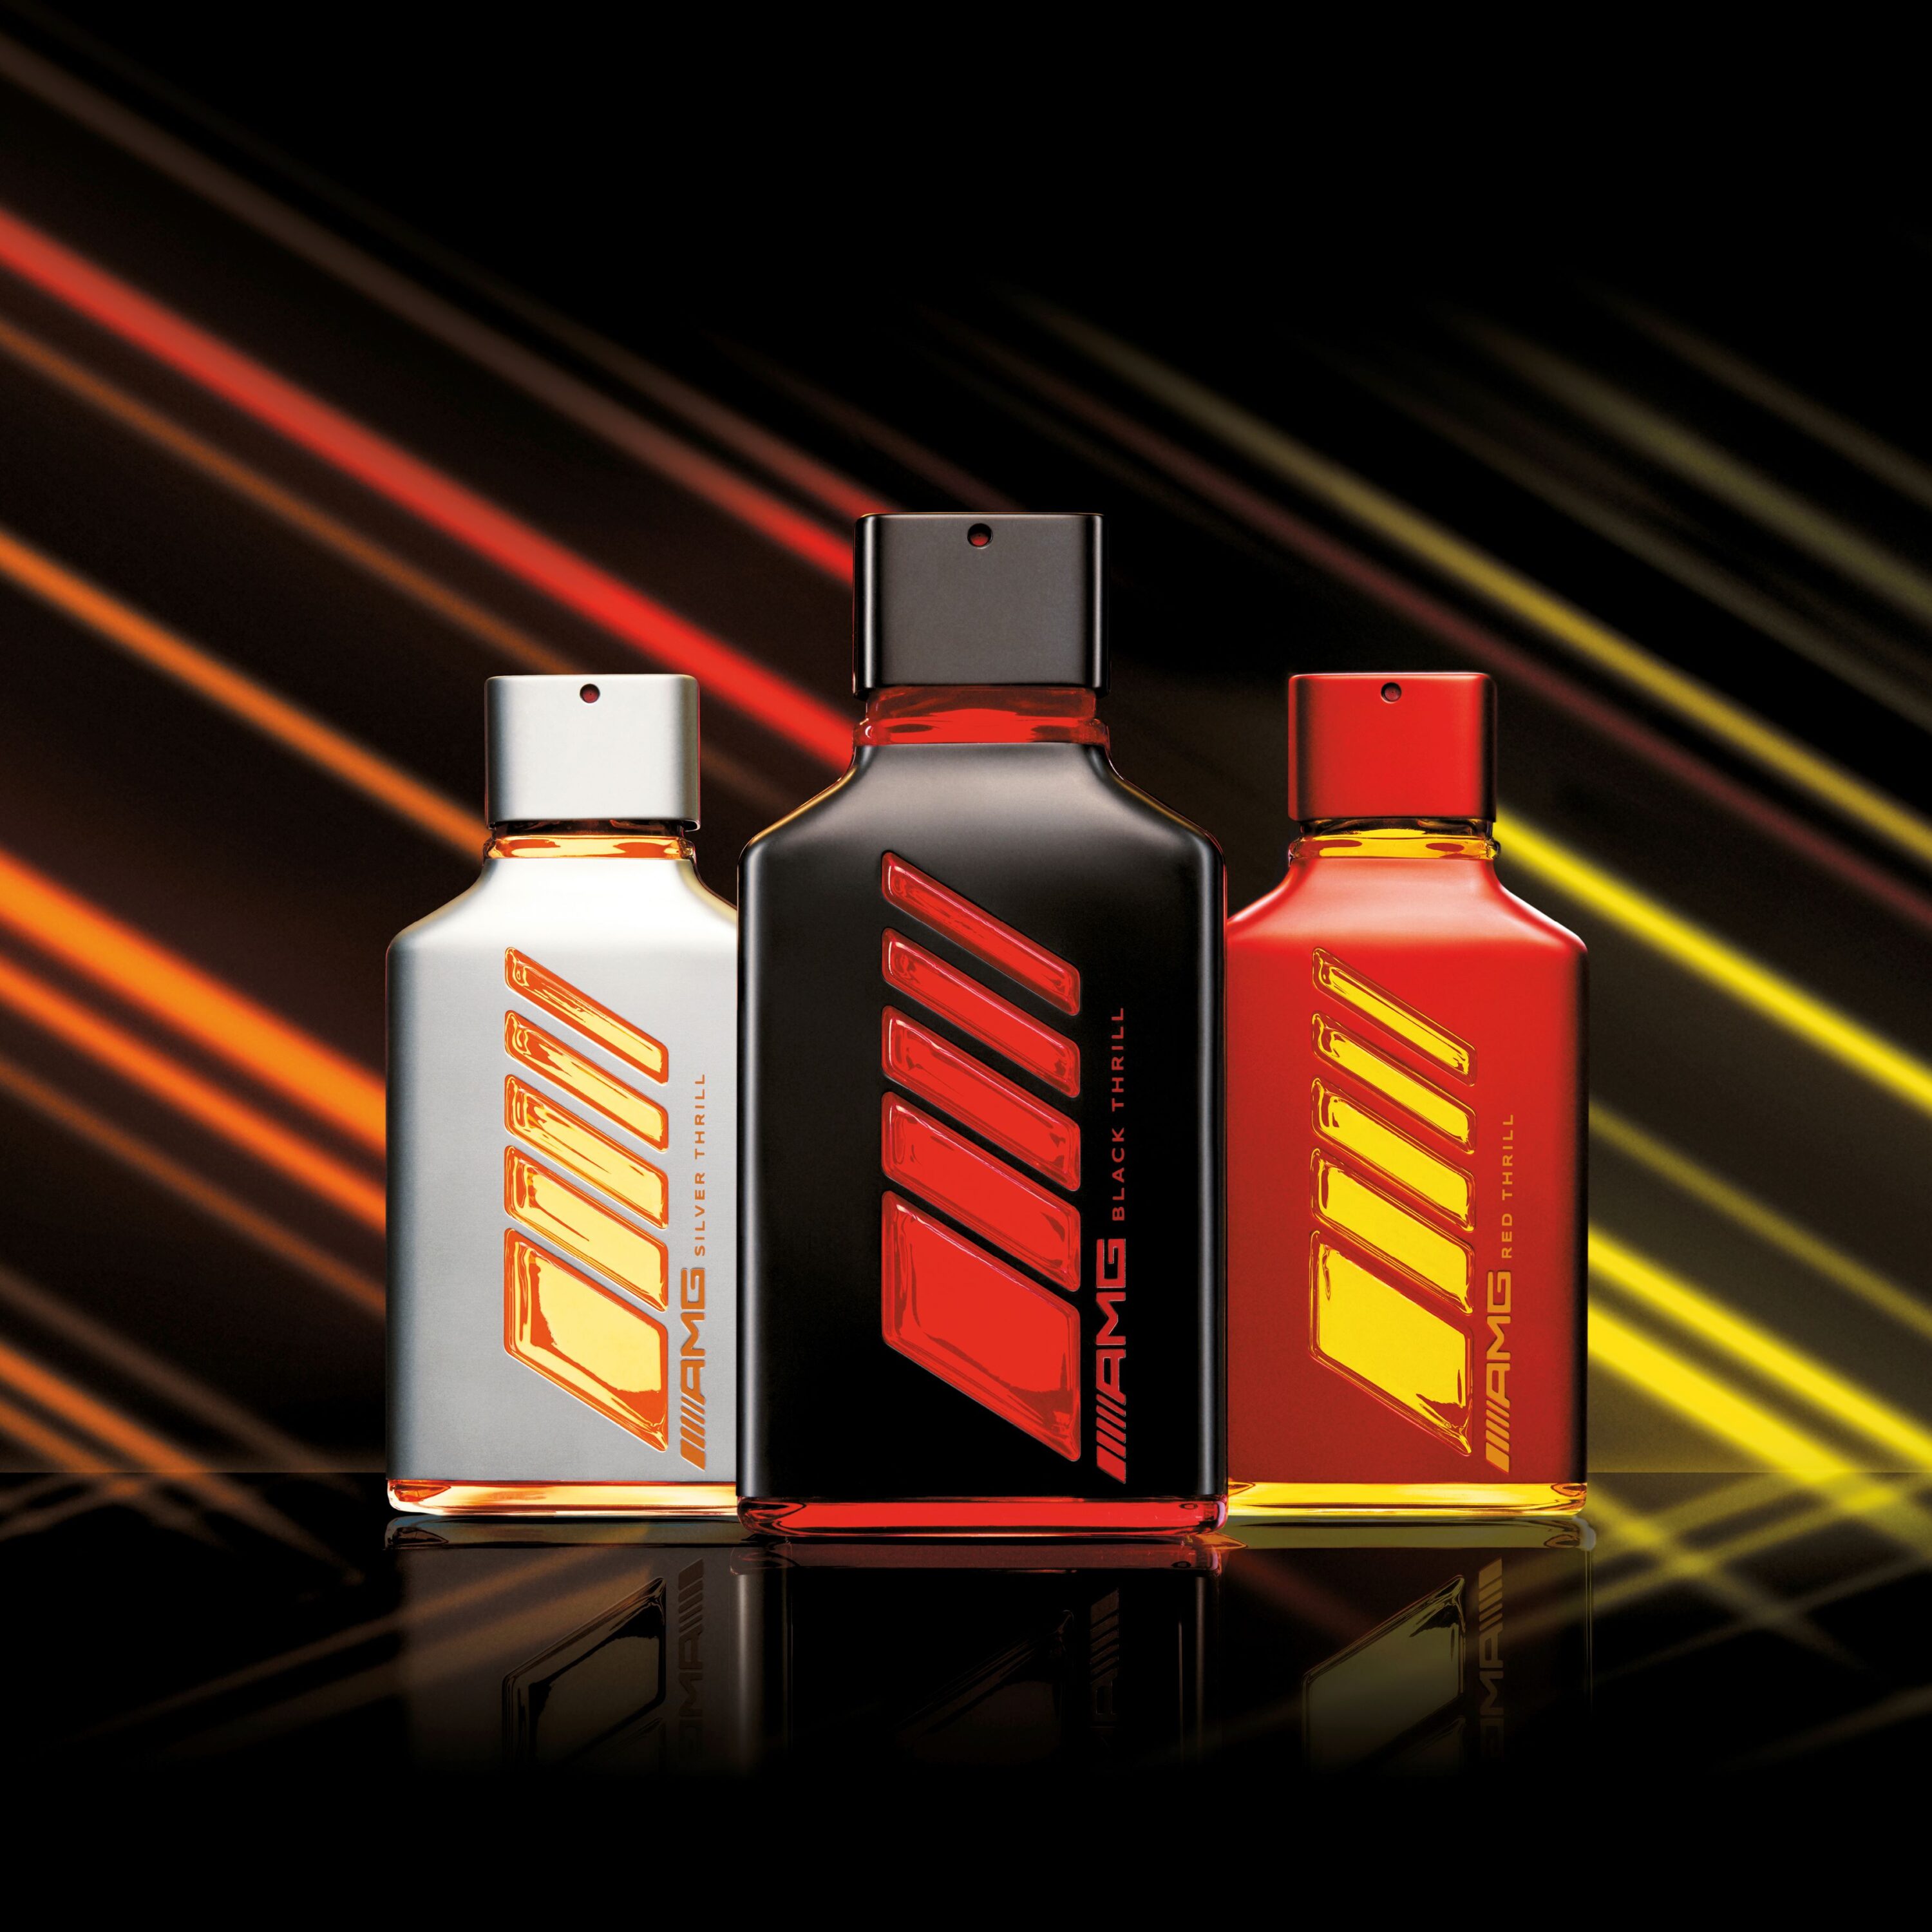 Promotional photo of three Mercedes-AMG fragrance bottles. One in silver, black and red respectively.